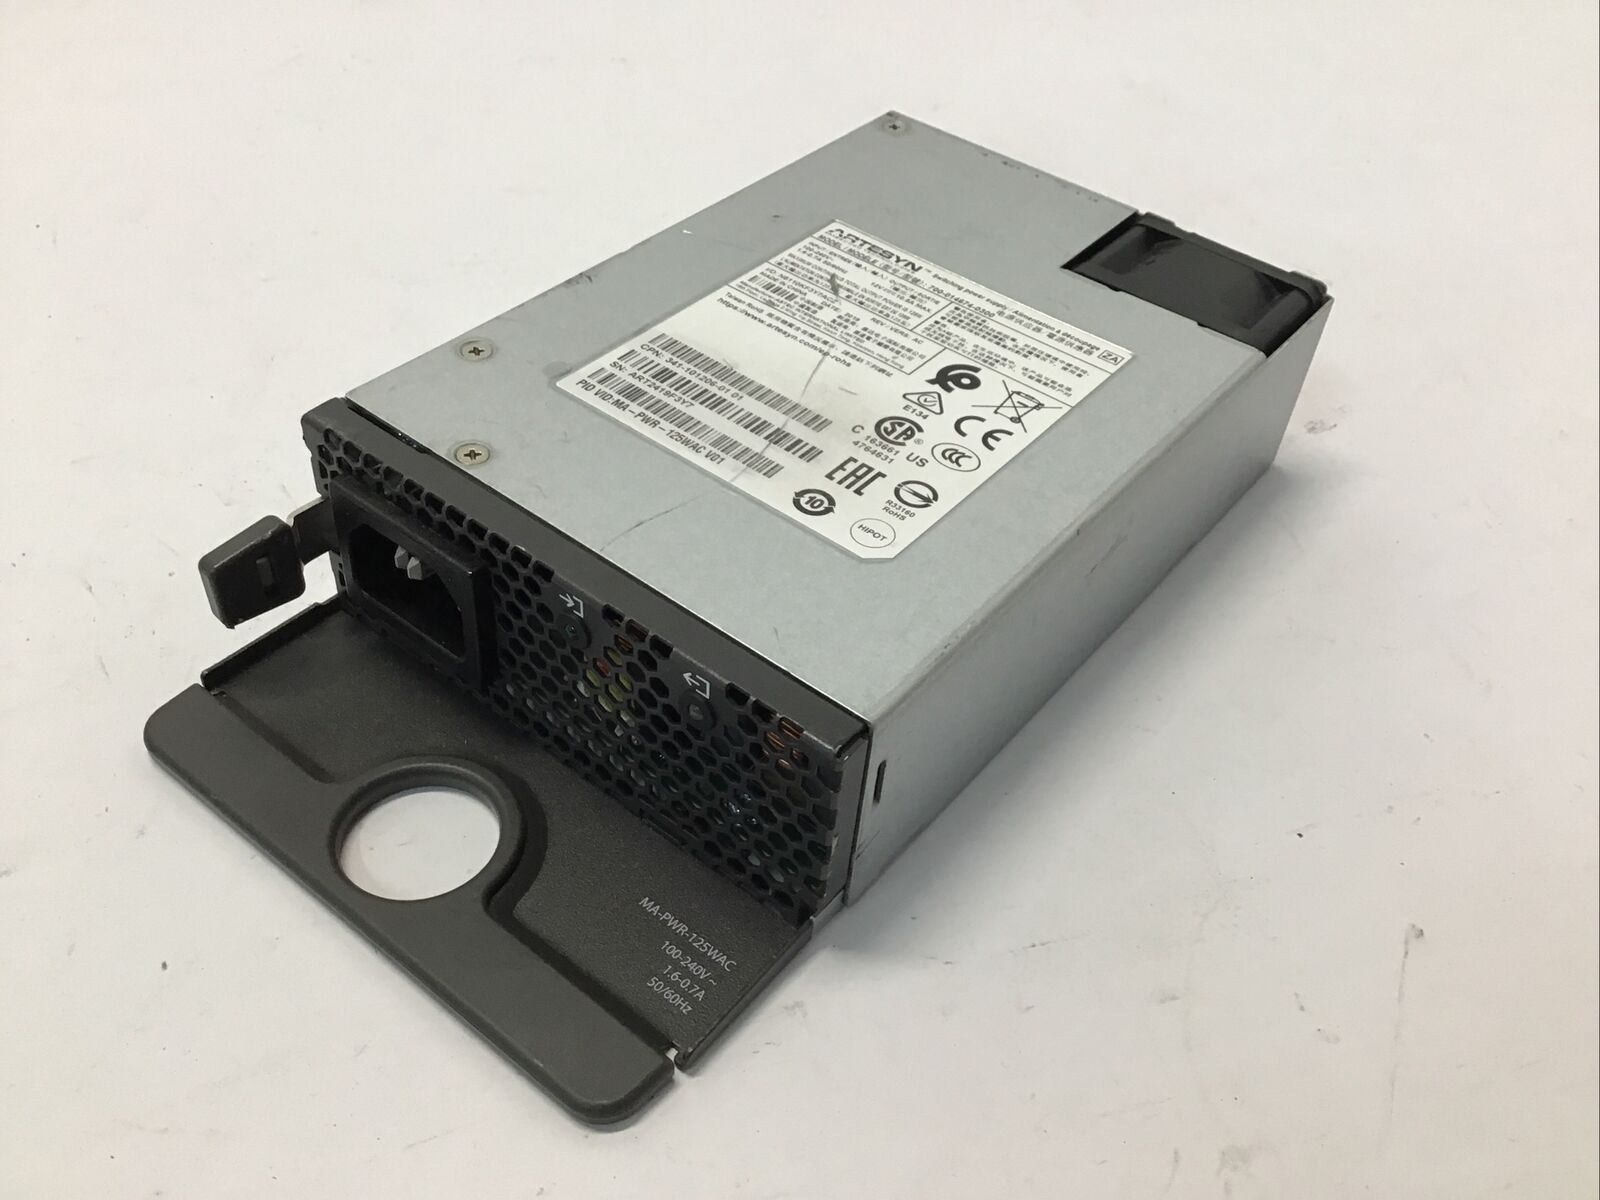 Cisco MA-PWR-125WAC 125W AC Power Supply for Catalyst 9200 Series Switches